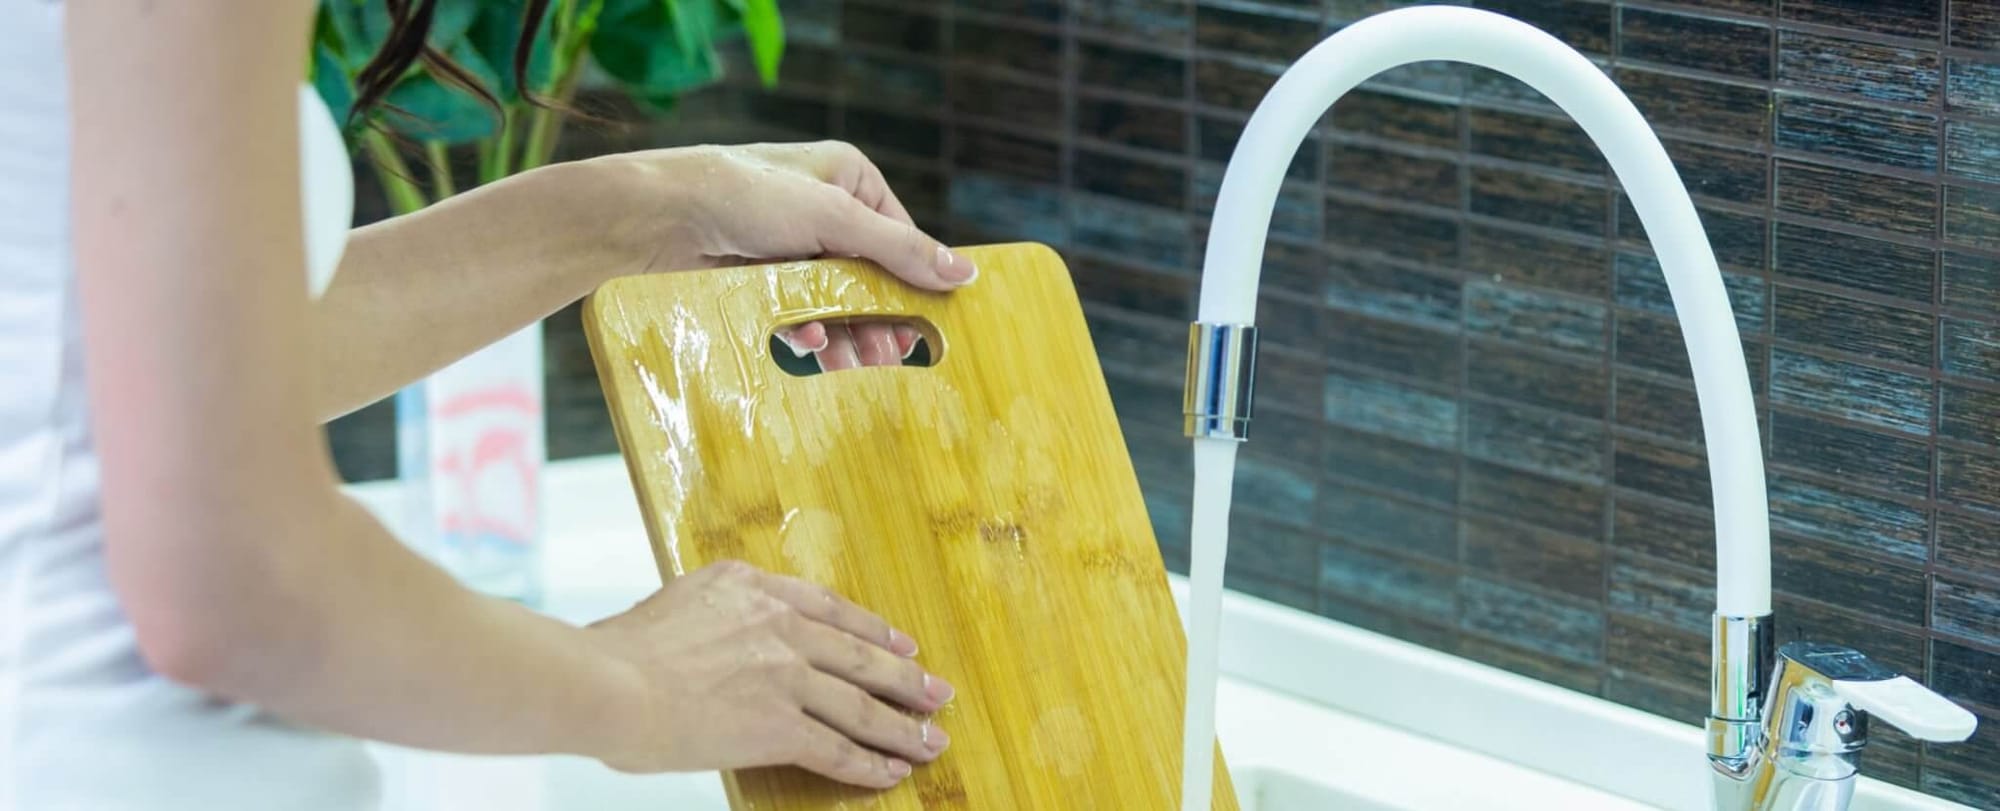 Best Practices for Sanitizing Bamboo Cutting Boards